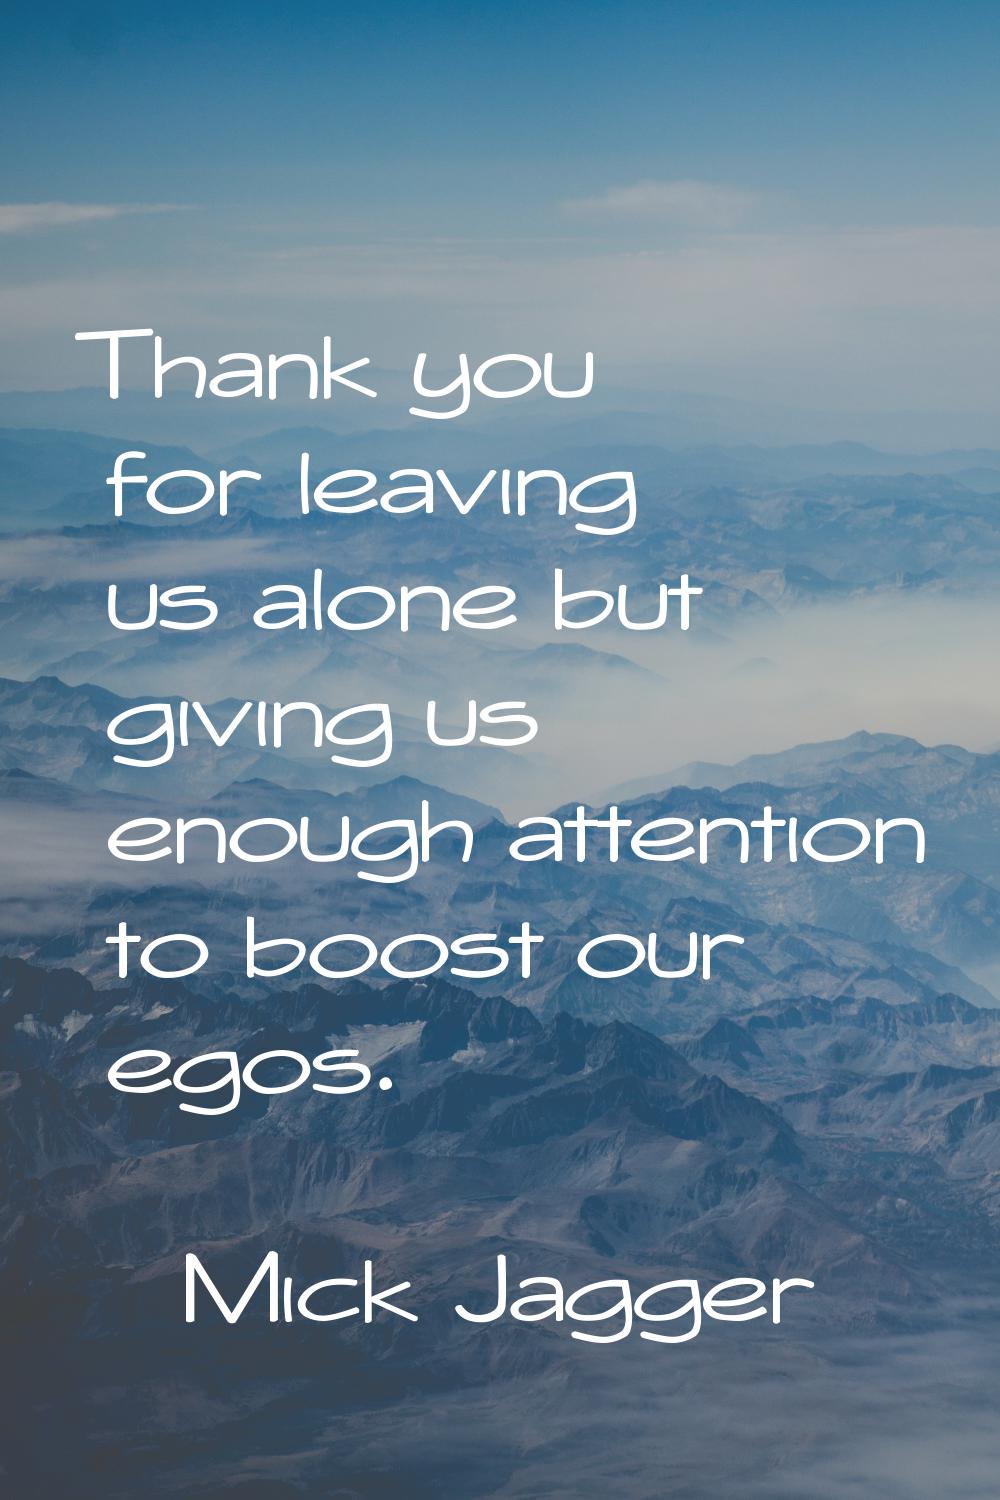 Thank you for leaving us alone but giving us enough attention to boost our egos.